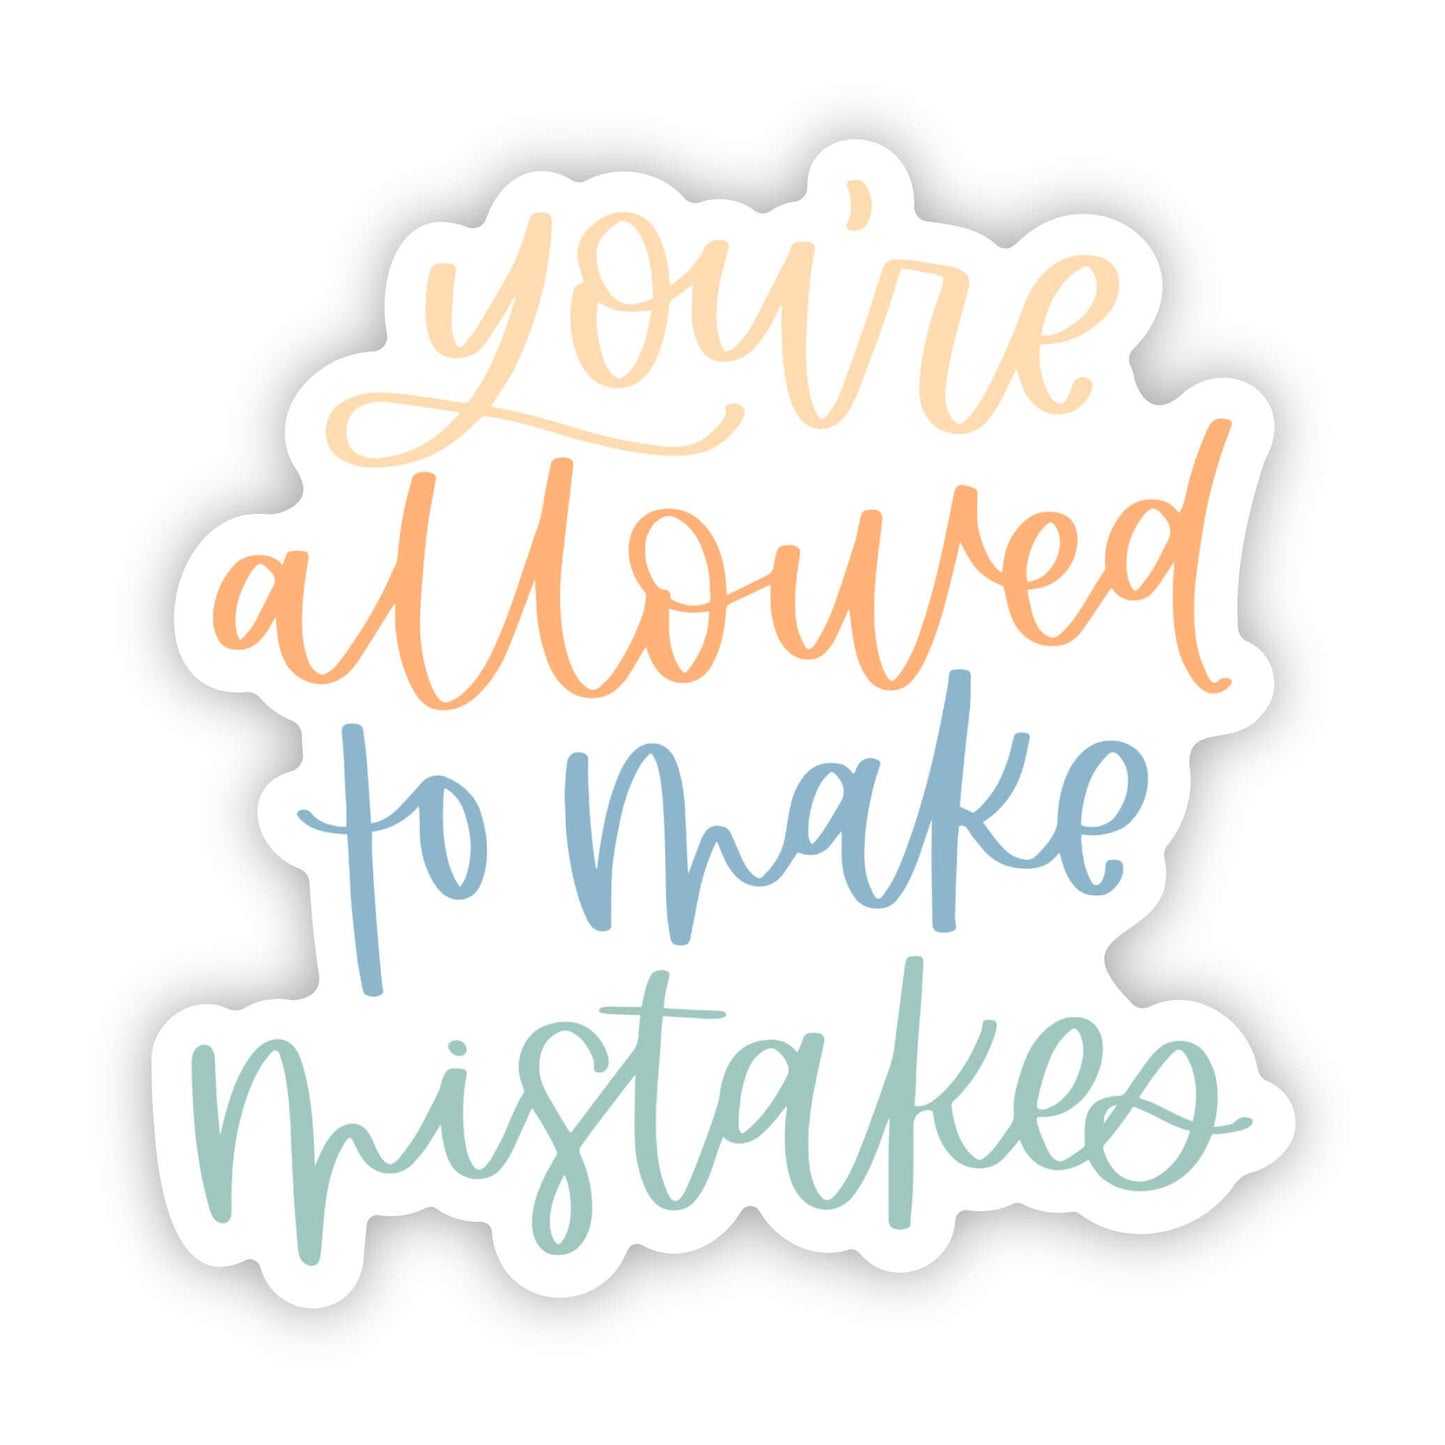 "You're Allowed To Make Mistakes" Sticker